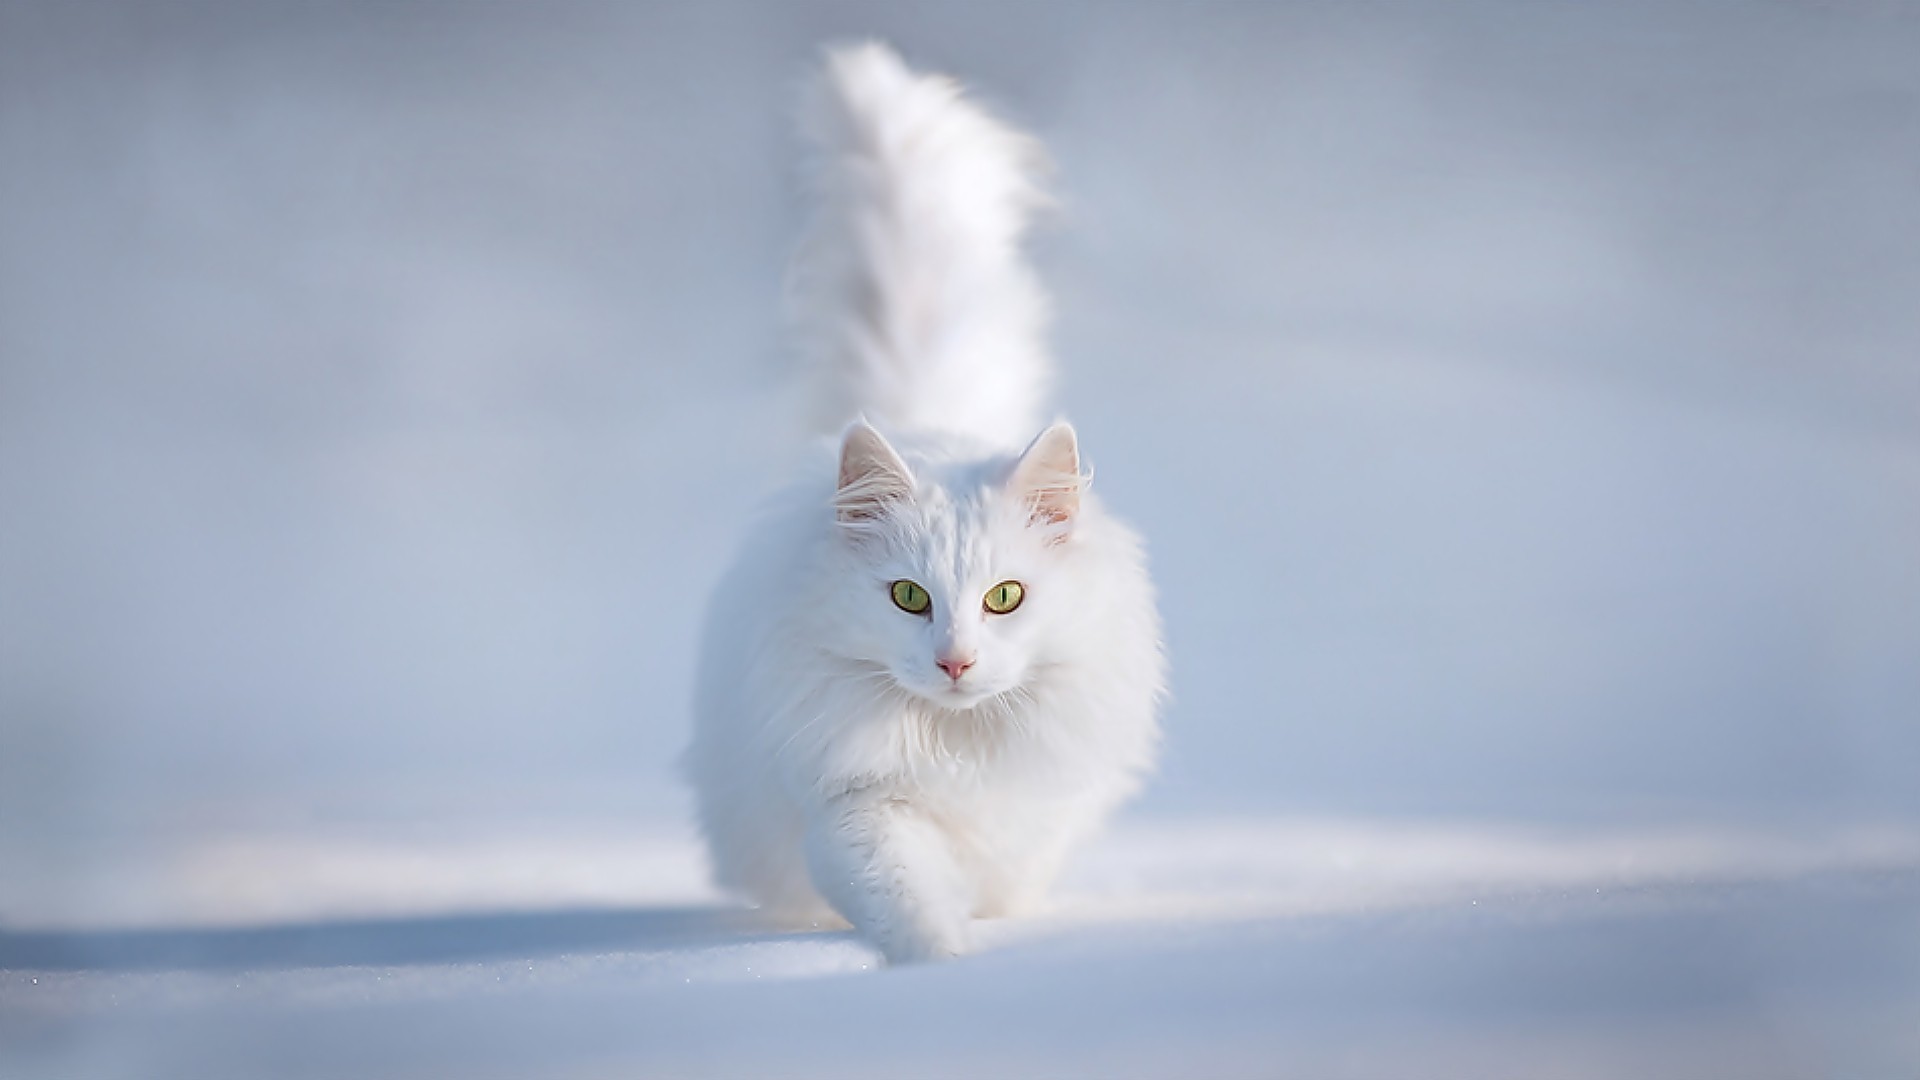 1920x1080 Download Cute White Persian Cat In Snow Wallpaper in high resolution ... -  More